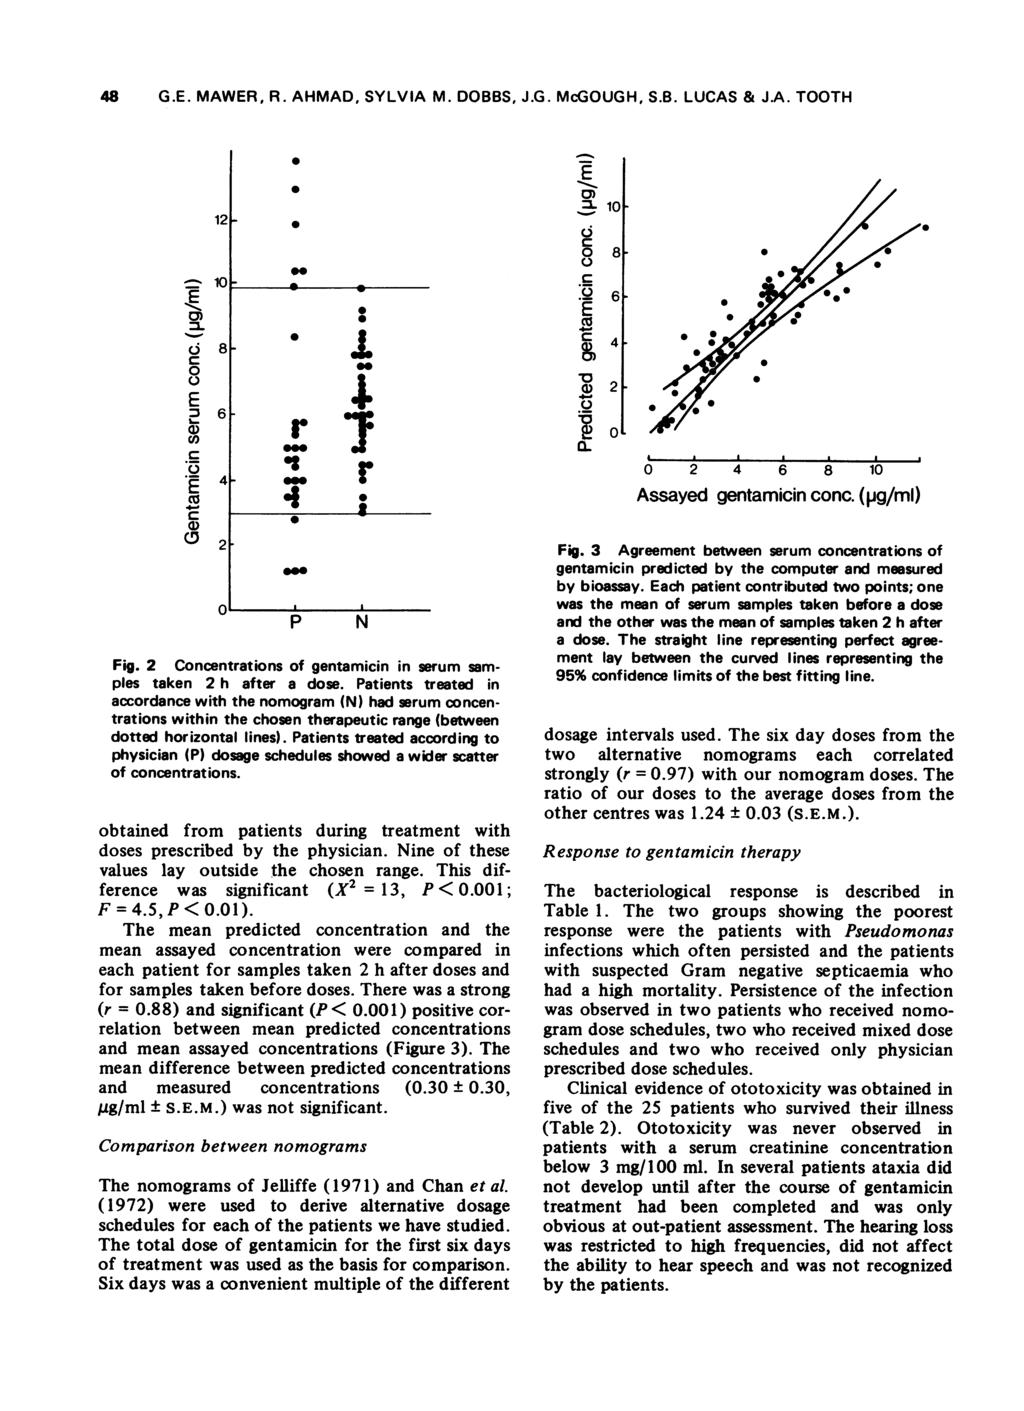 8 G.. MAWR, R. AHMAD, SYLVIA M. DOBBS, J.G. McGOUGH, S.B. LUCAS & J.A. TOOTH cn * a) 12-1._5 CD CD9 (!5o._ * * 1 * r P Fig. 2 Concentrations of gentamicin in serum samples taken 2 h after a dose.